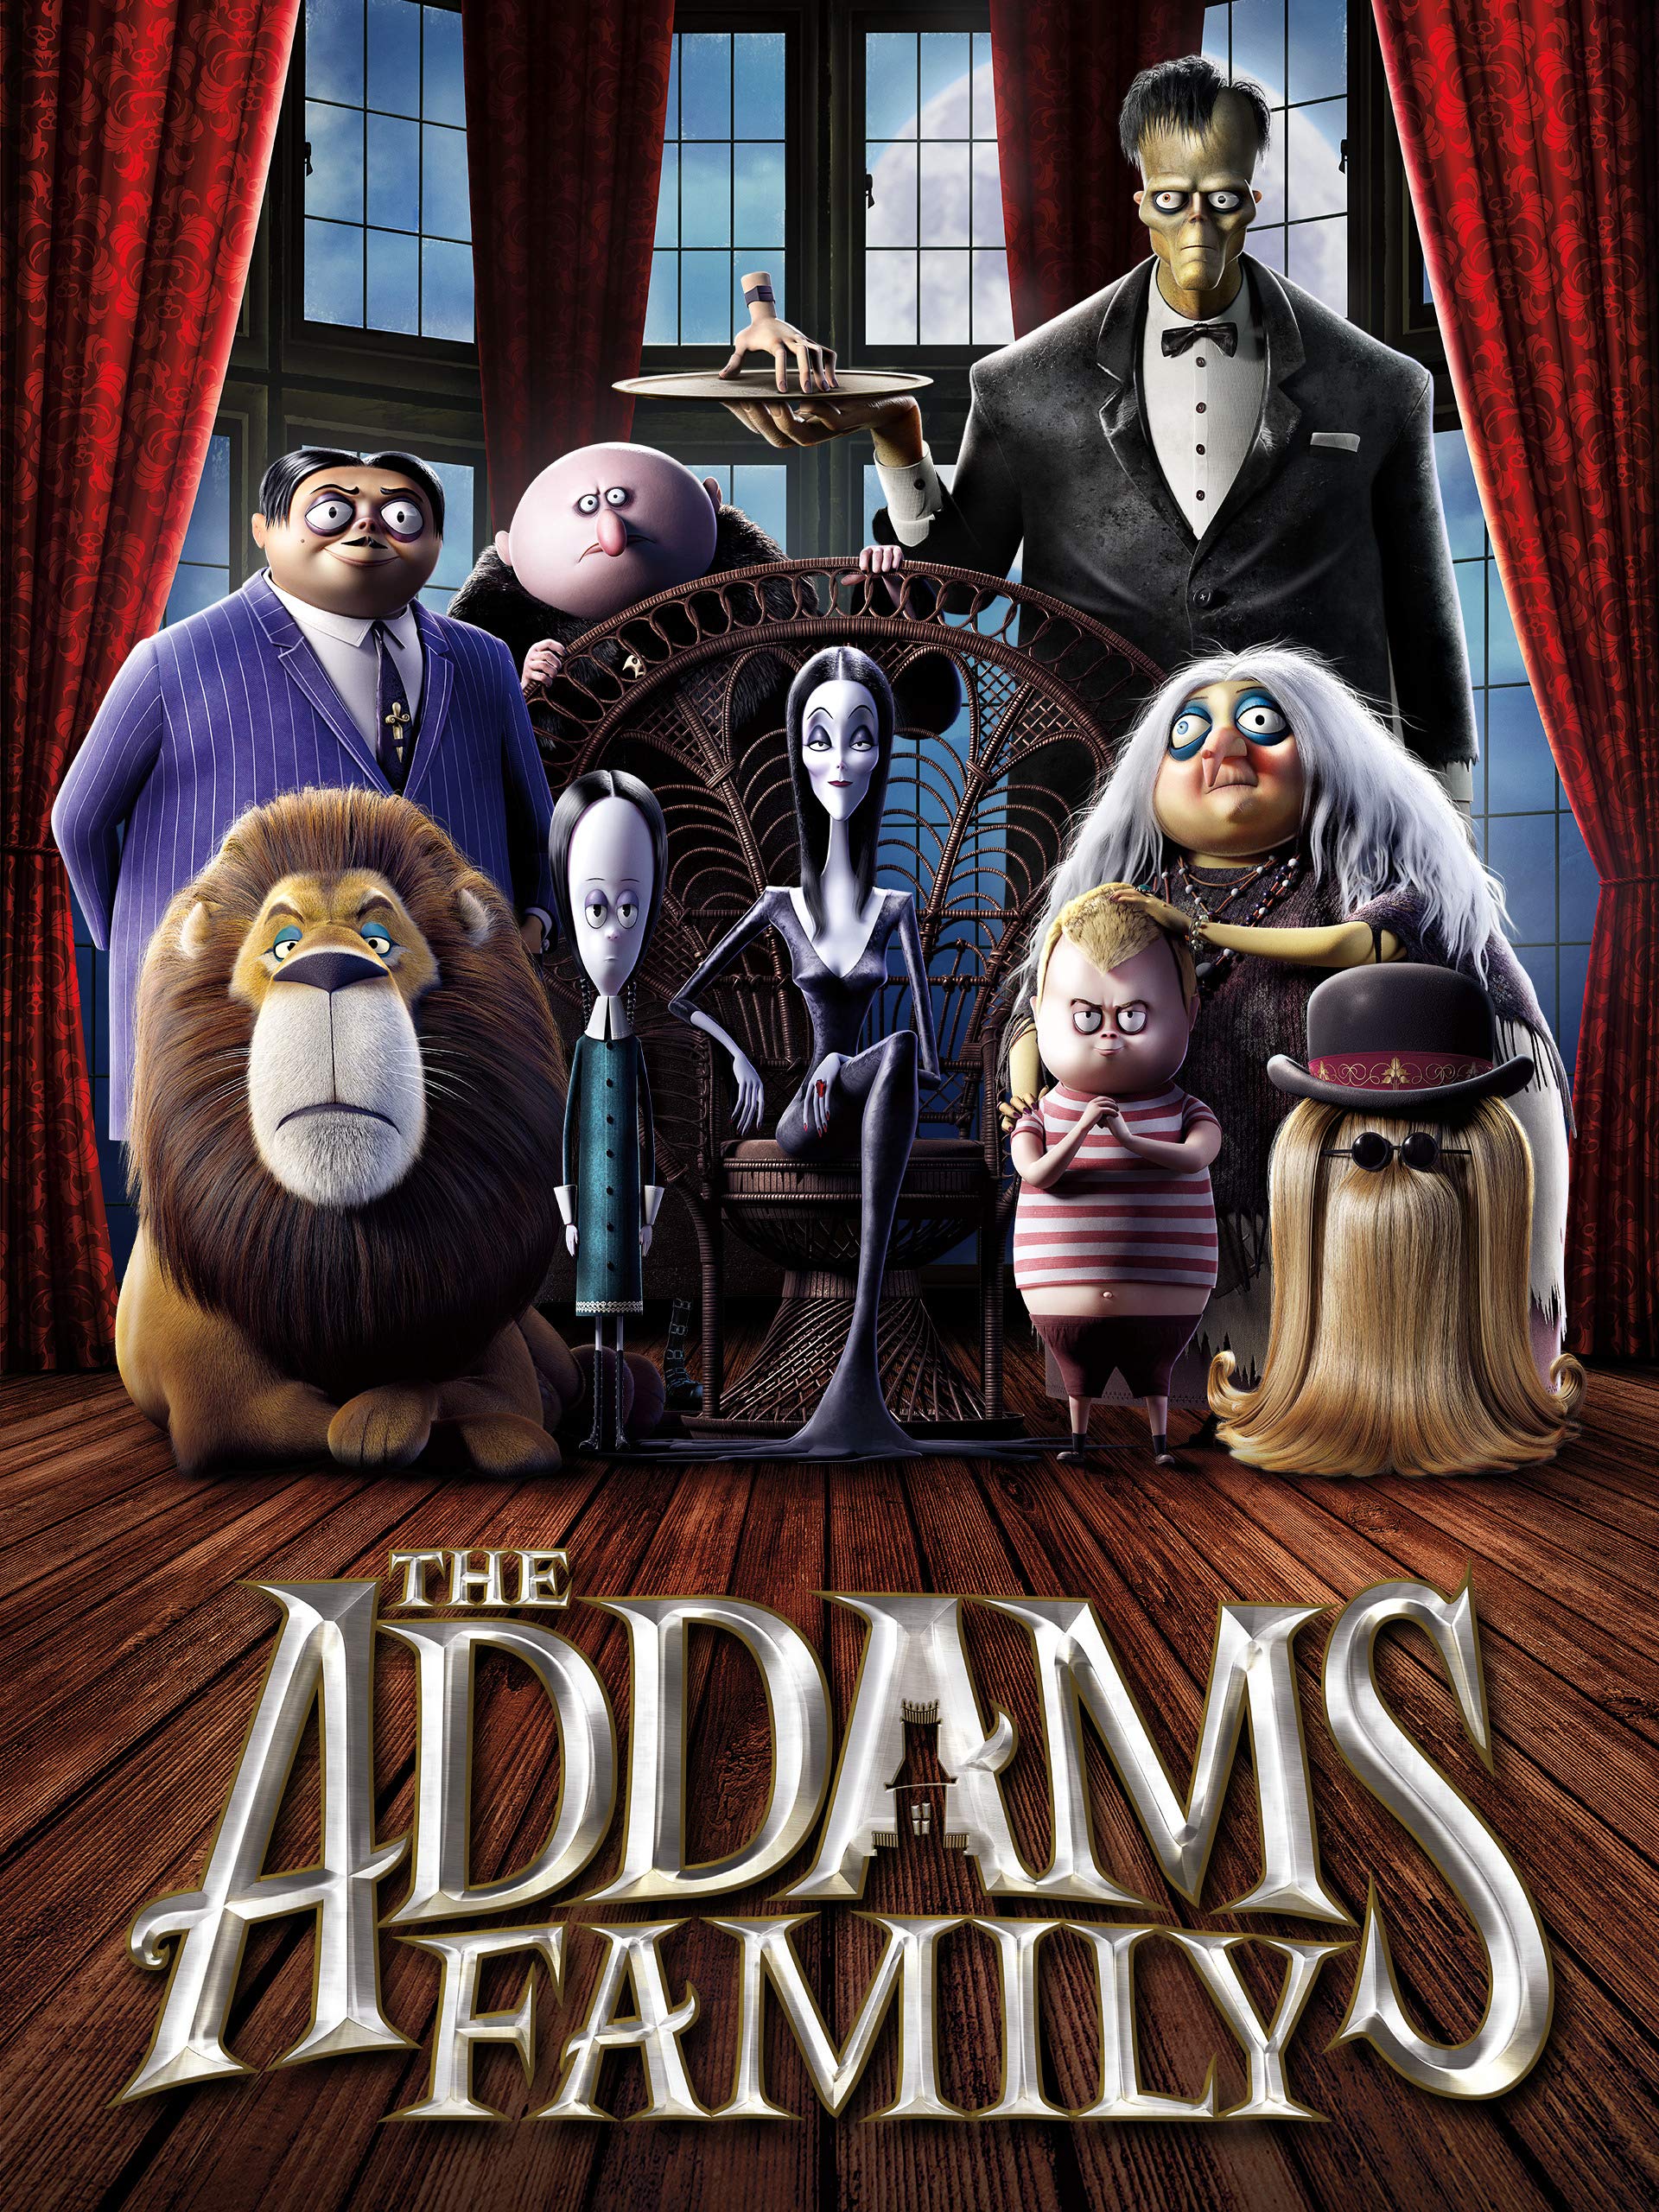 The Addams Family 2019 animated film poster.